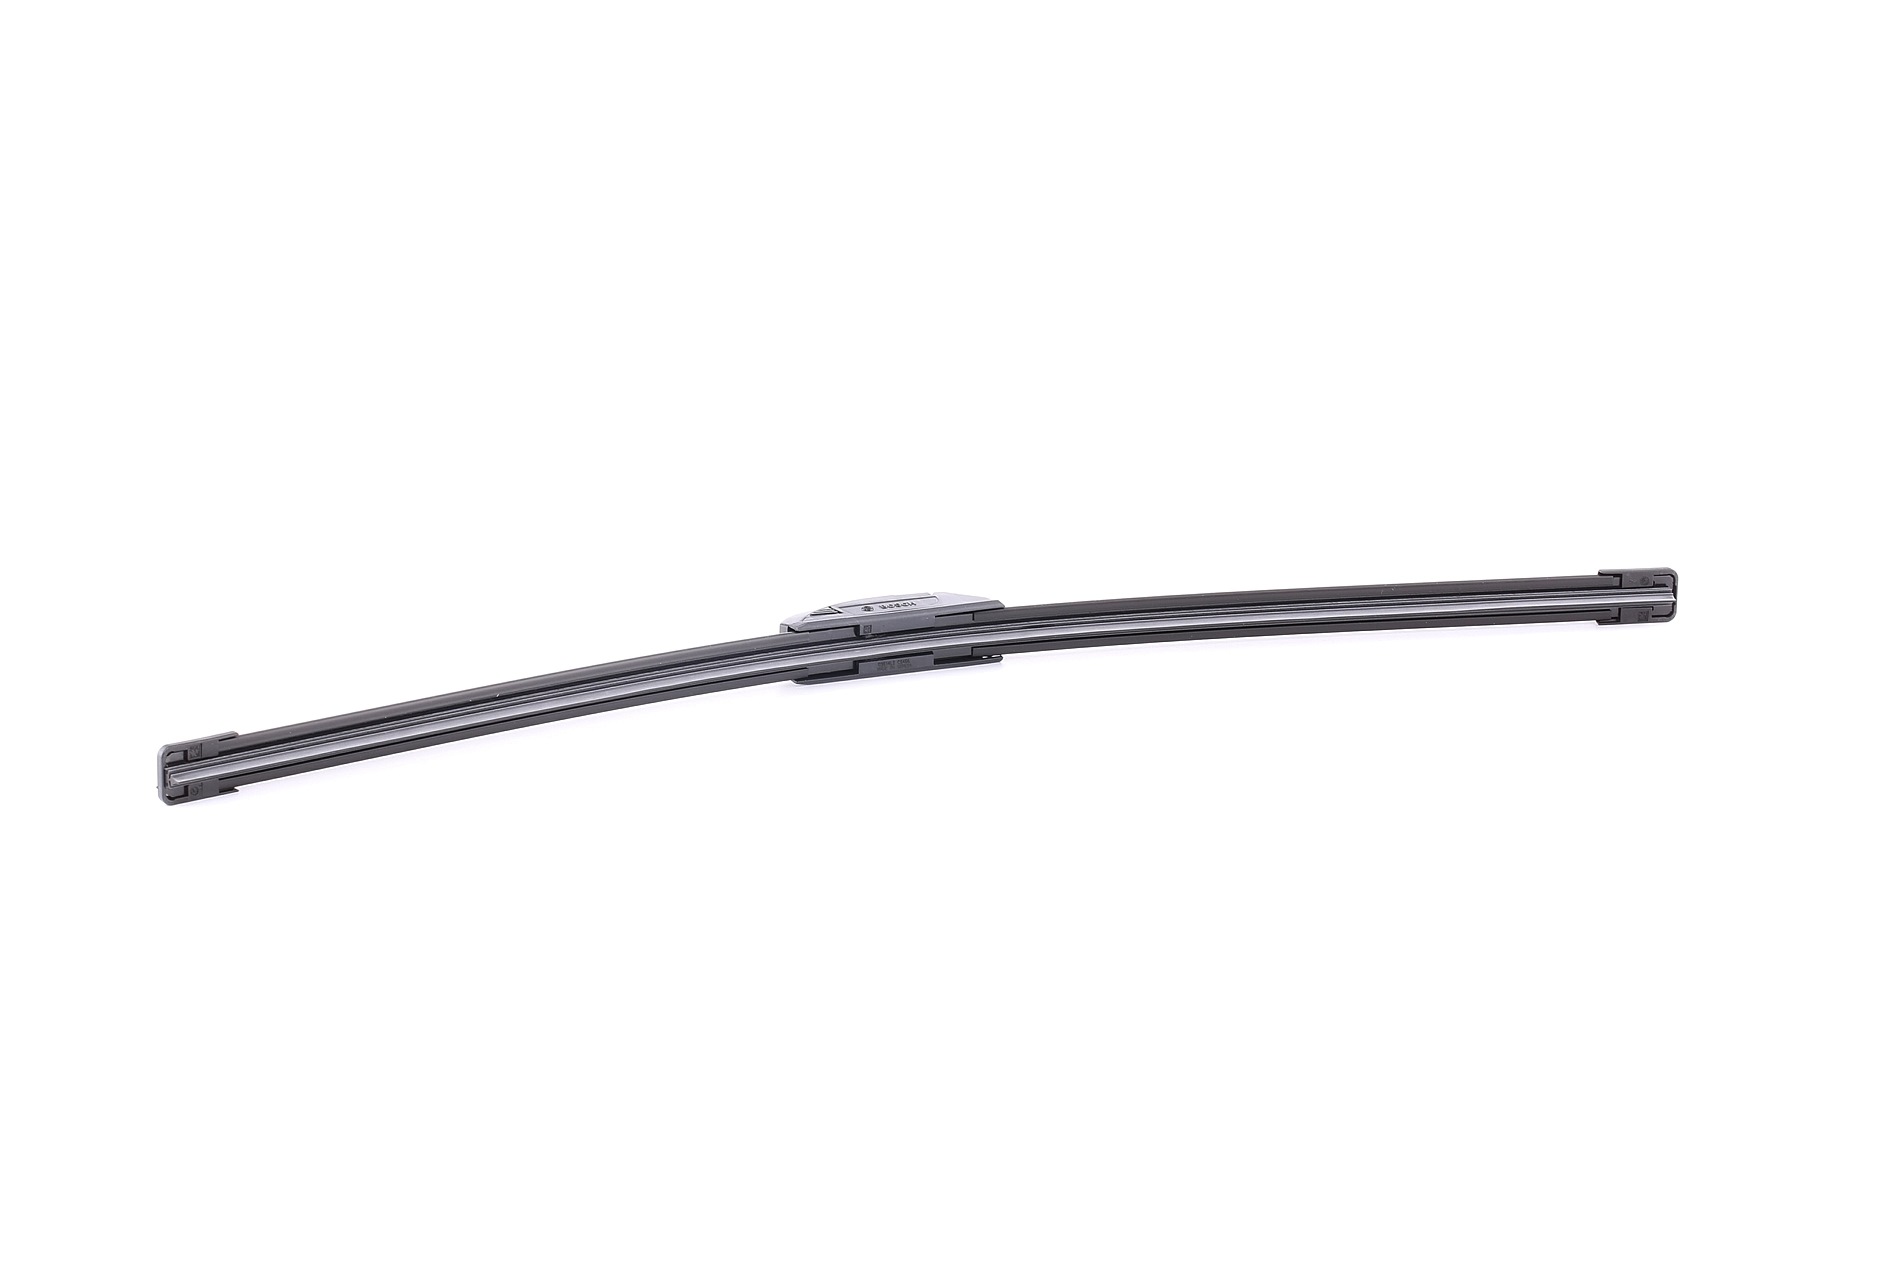 Wiper blade BOSCH 3 397 008 940 - Lancia Y (840) Windscreen cleaning system spare parts order